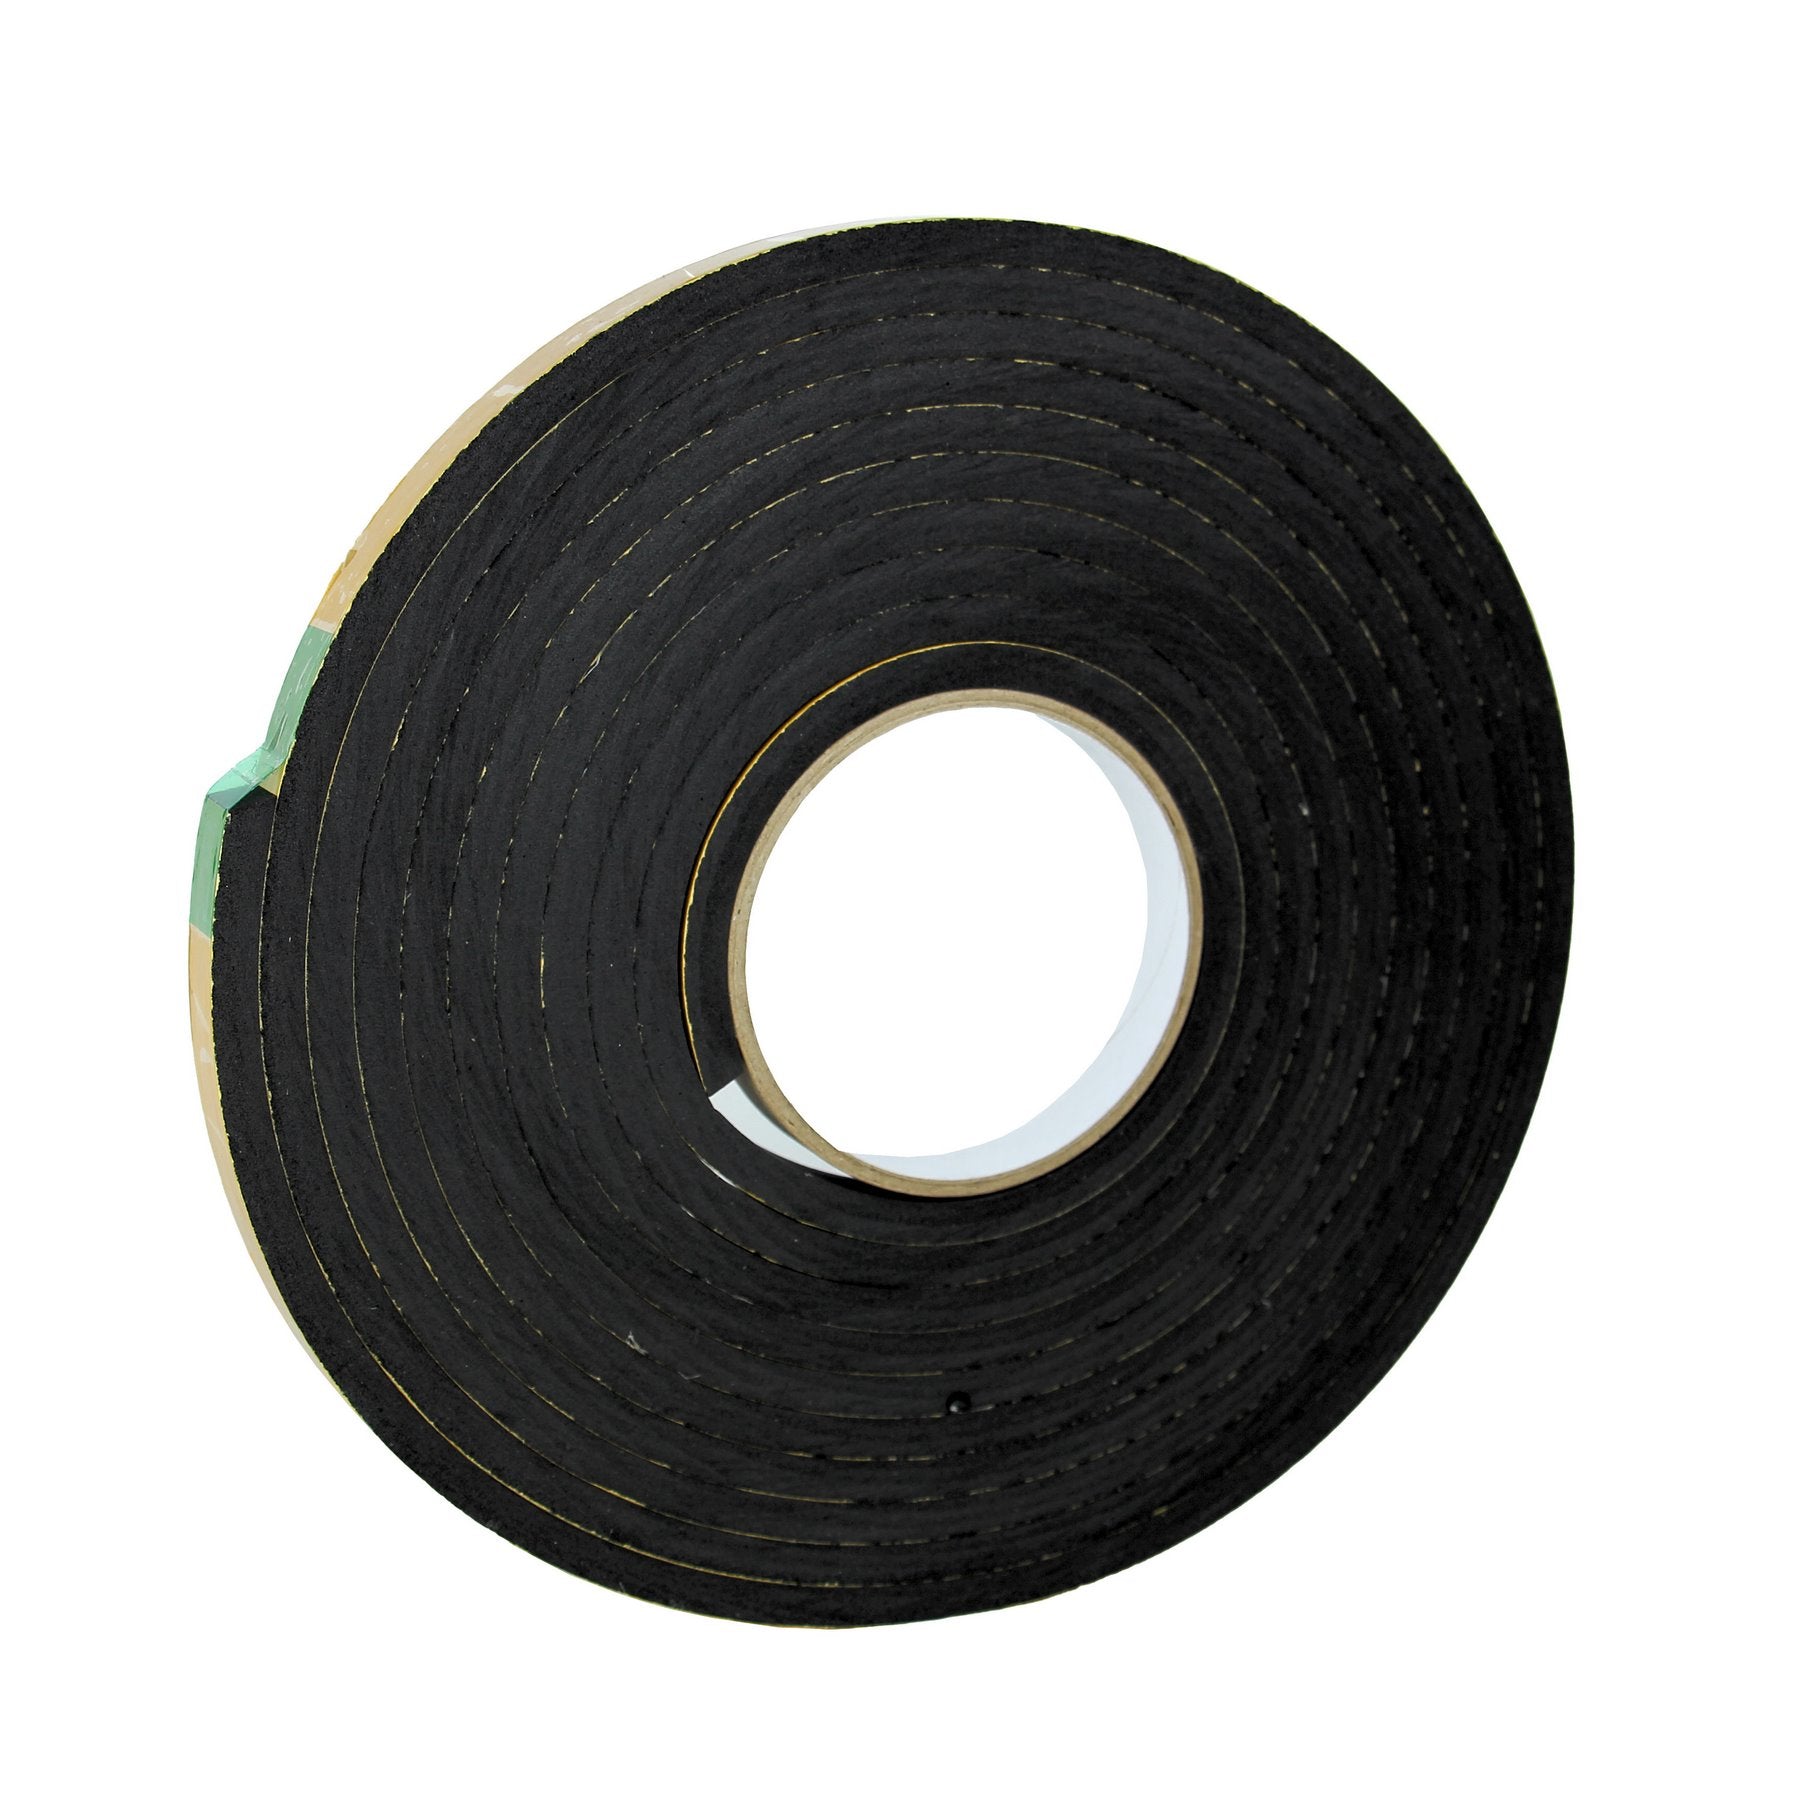 Furndiy Insulation Tape, Weather Stripping Door Seal Strip for Doors and Windows, Sound Proof Door Seal, Weatherstrip, Air Conditioning Seal Strip